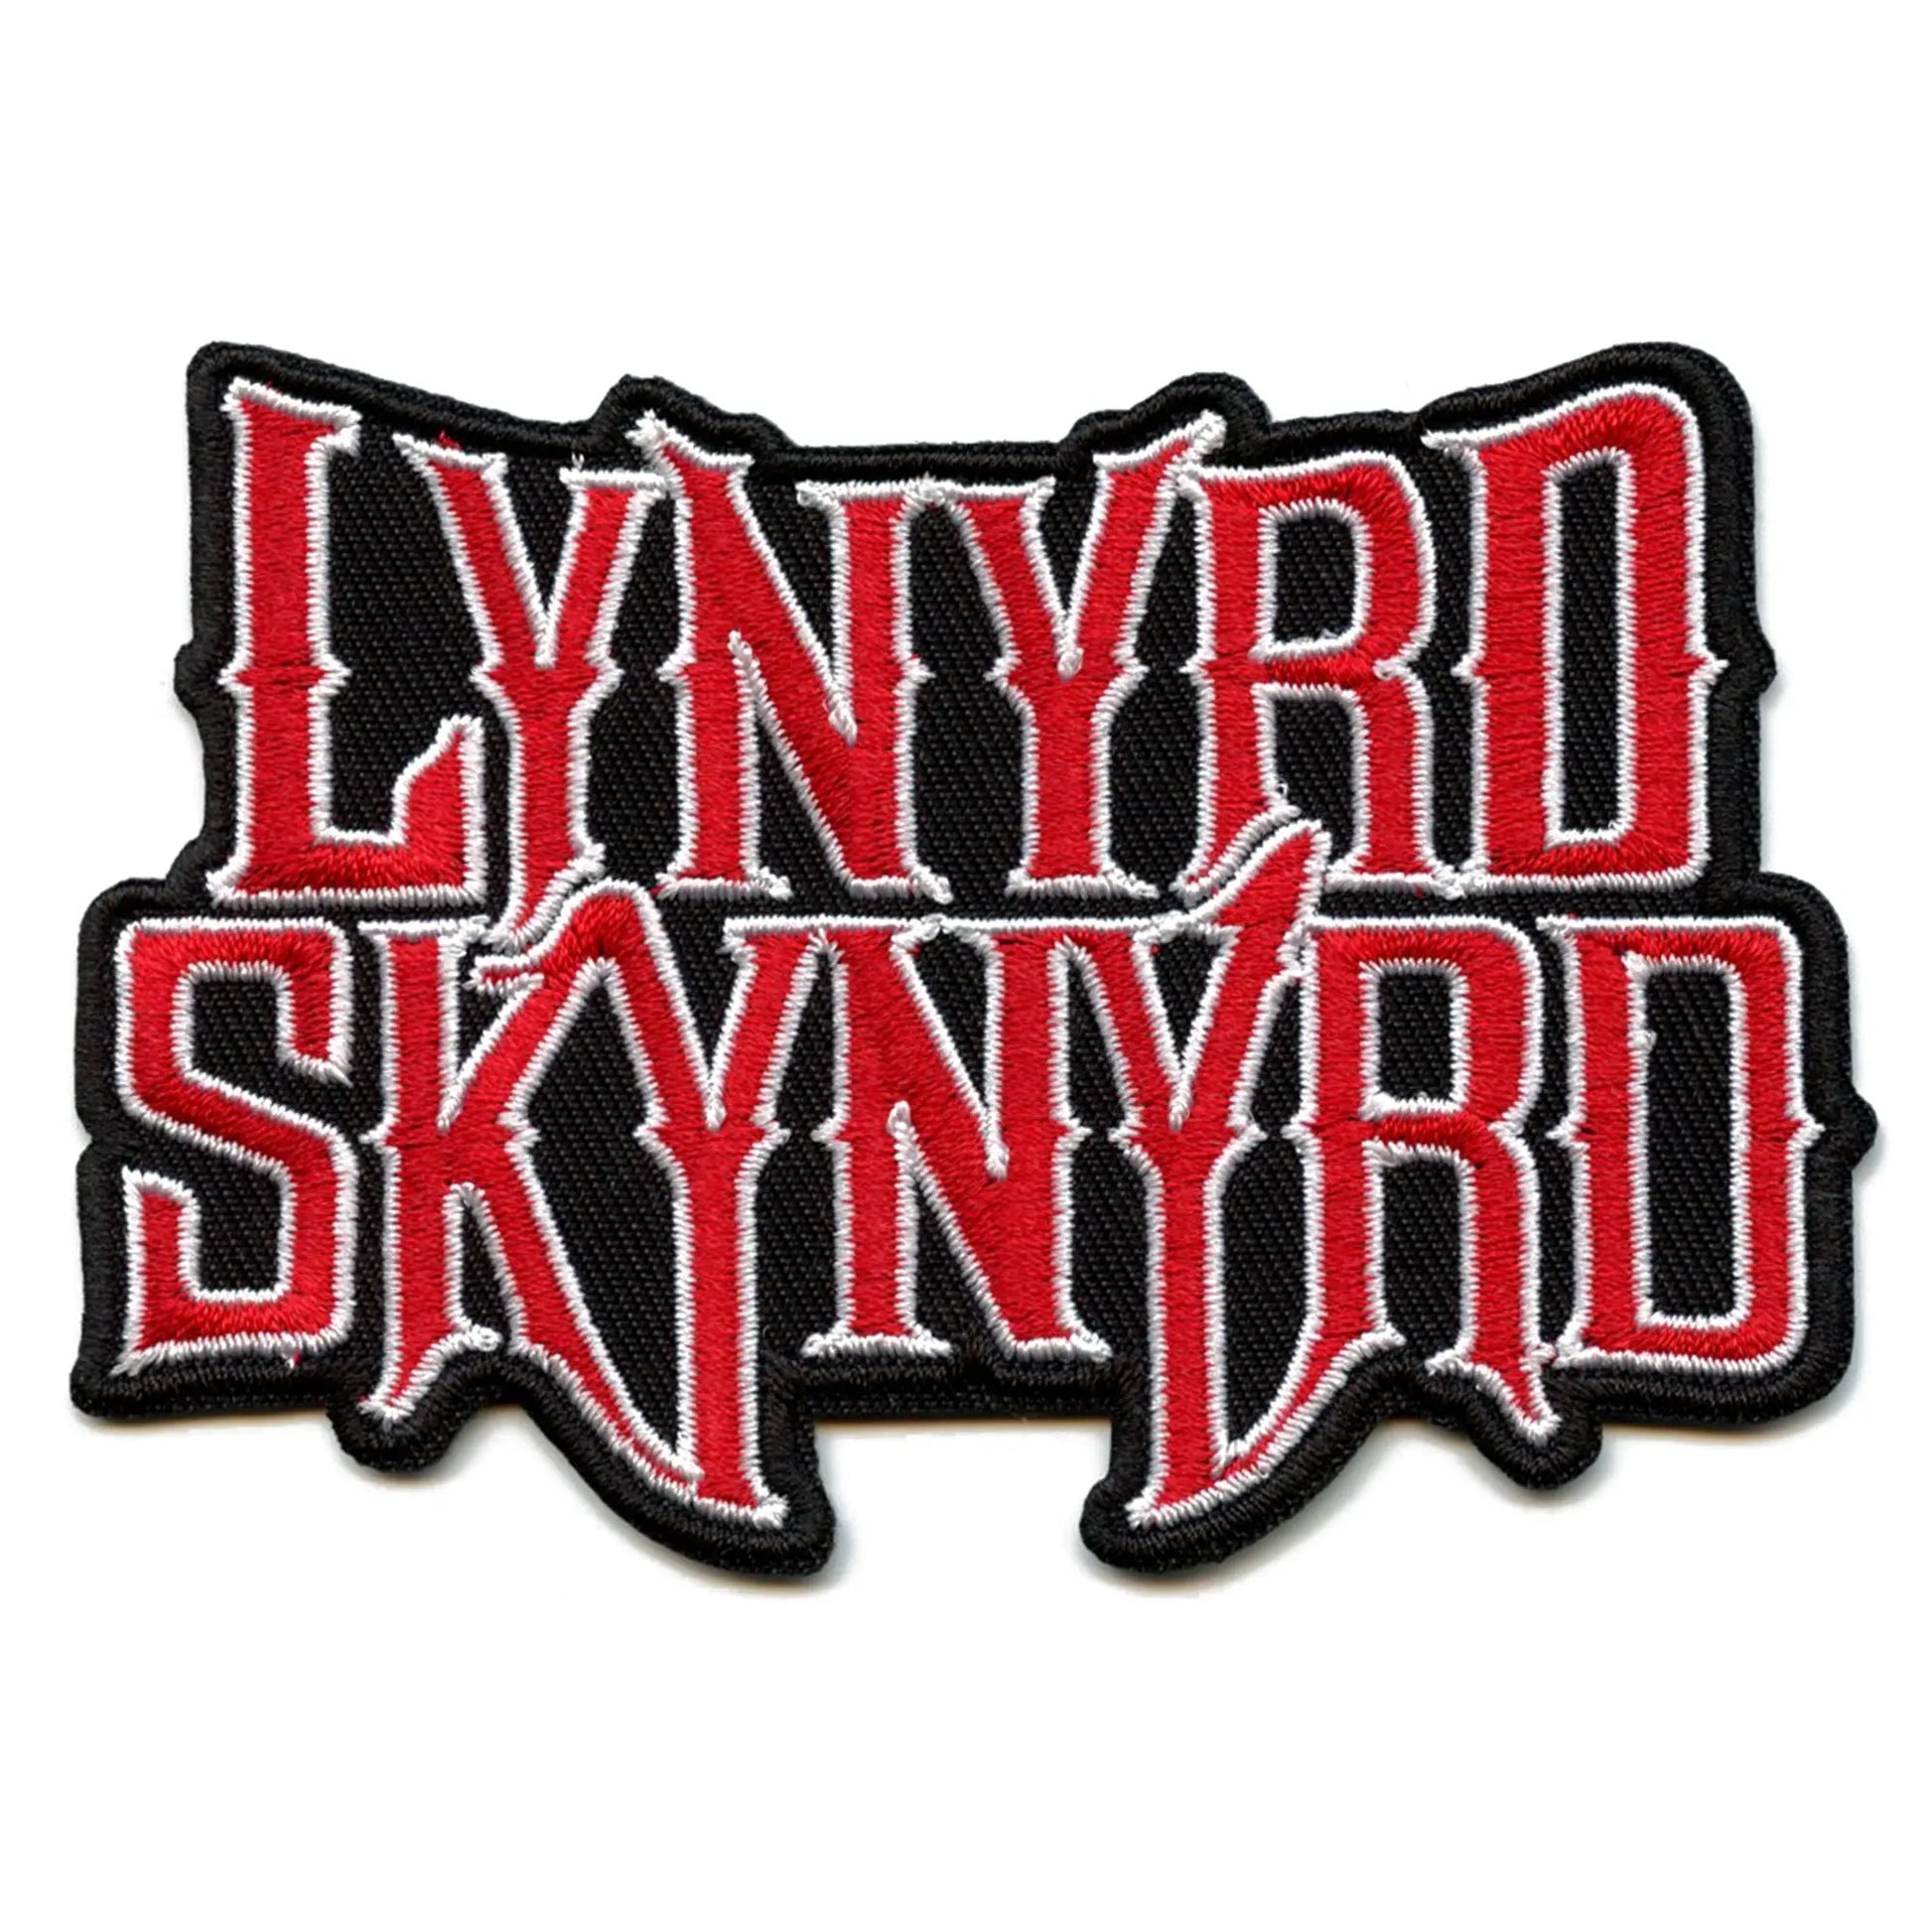 Lynyrd Skynyrd Red Logo Patch Classic Rock Band Embroidered Iron On